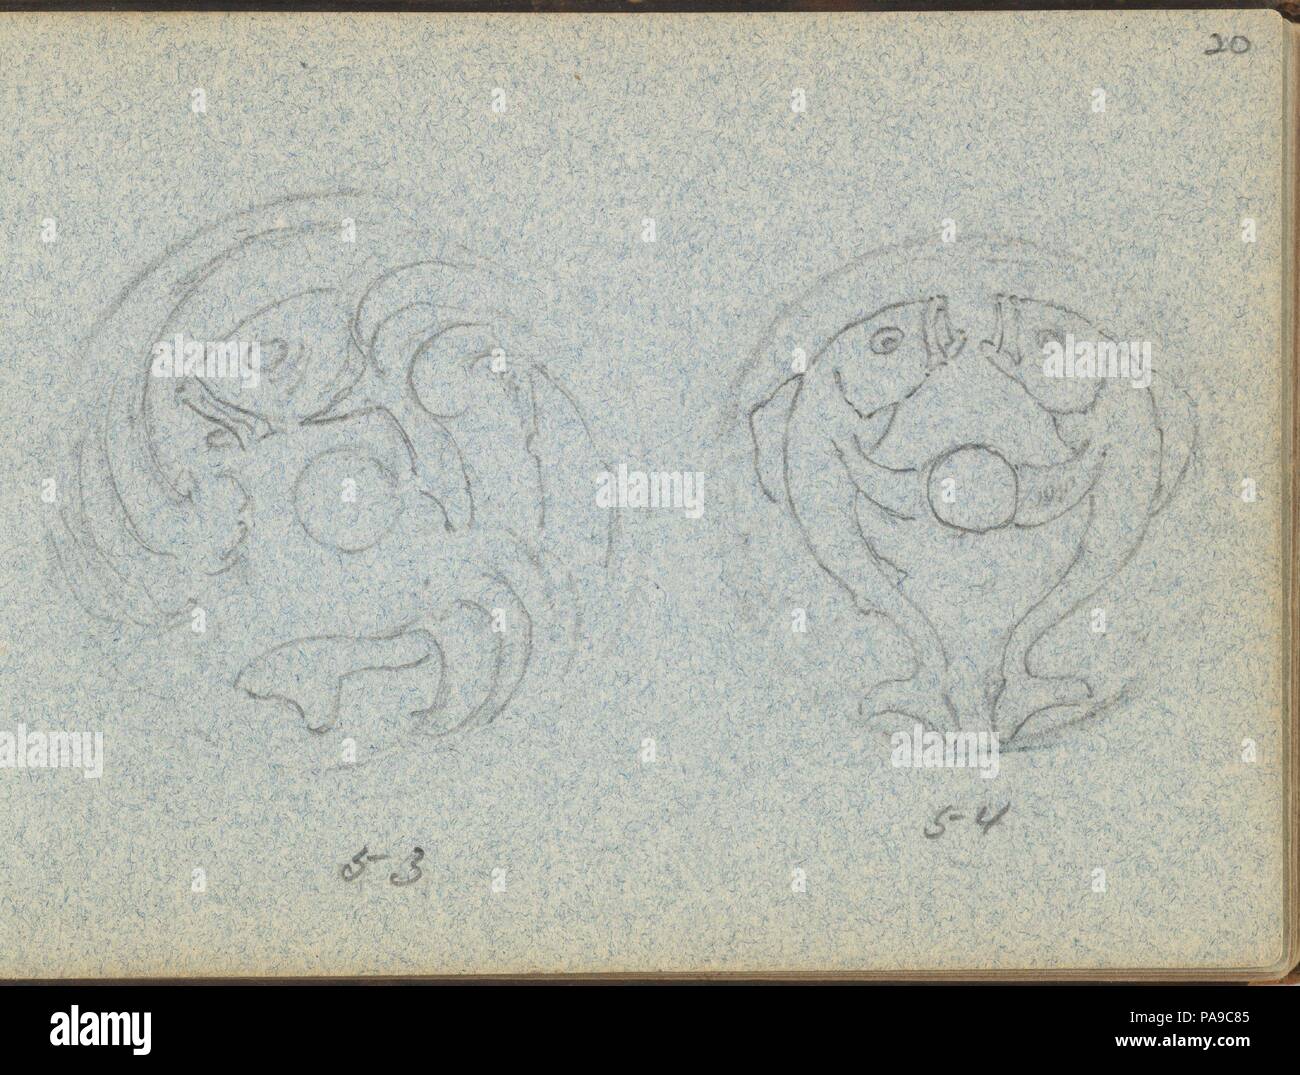 Two Outlines for a Bell Push with Fish Motifs. Artist: Edgar Gilstrap Simpson (British, 1867-1945 (presumed)). Dimensions: sheet: 3 1/2 x 5 in. (8.9 x 12.7 cm). Date: 1899.  Two outlines for a round bell push decorated with fish motifs. The design on the left shows a fish combined with wave patterns. The design on the right is characterized by two, symmetrically placed fishes holding up the bottun of the bell push with their fins. Museum: Metropolitan Museum of Art, New York, USA. Stock Photo